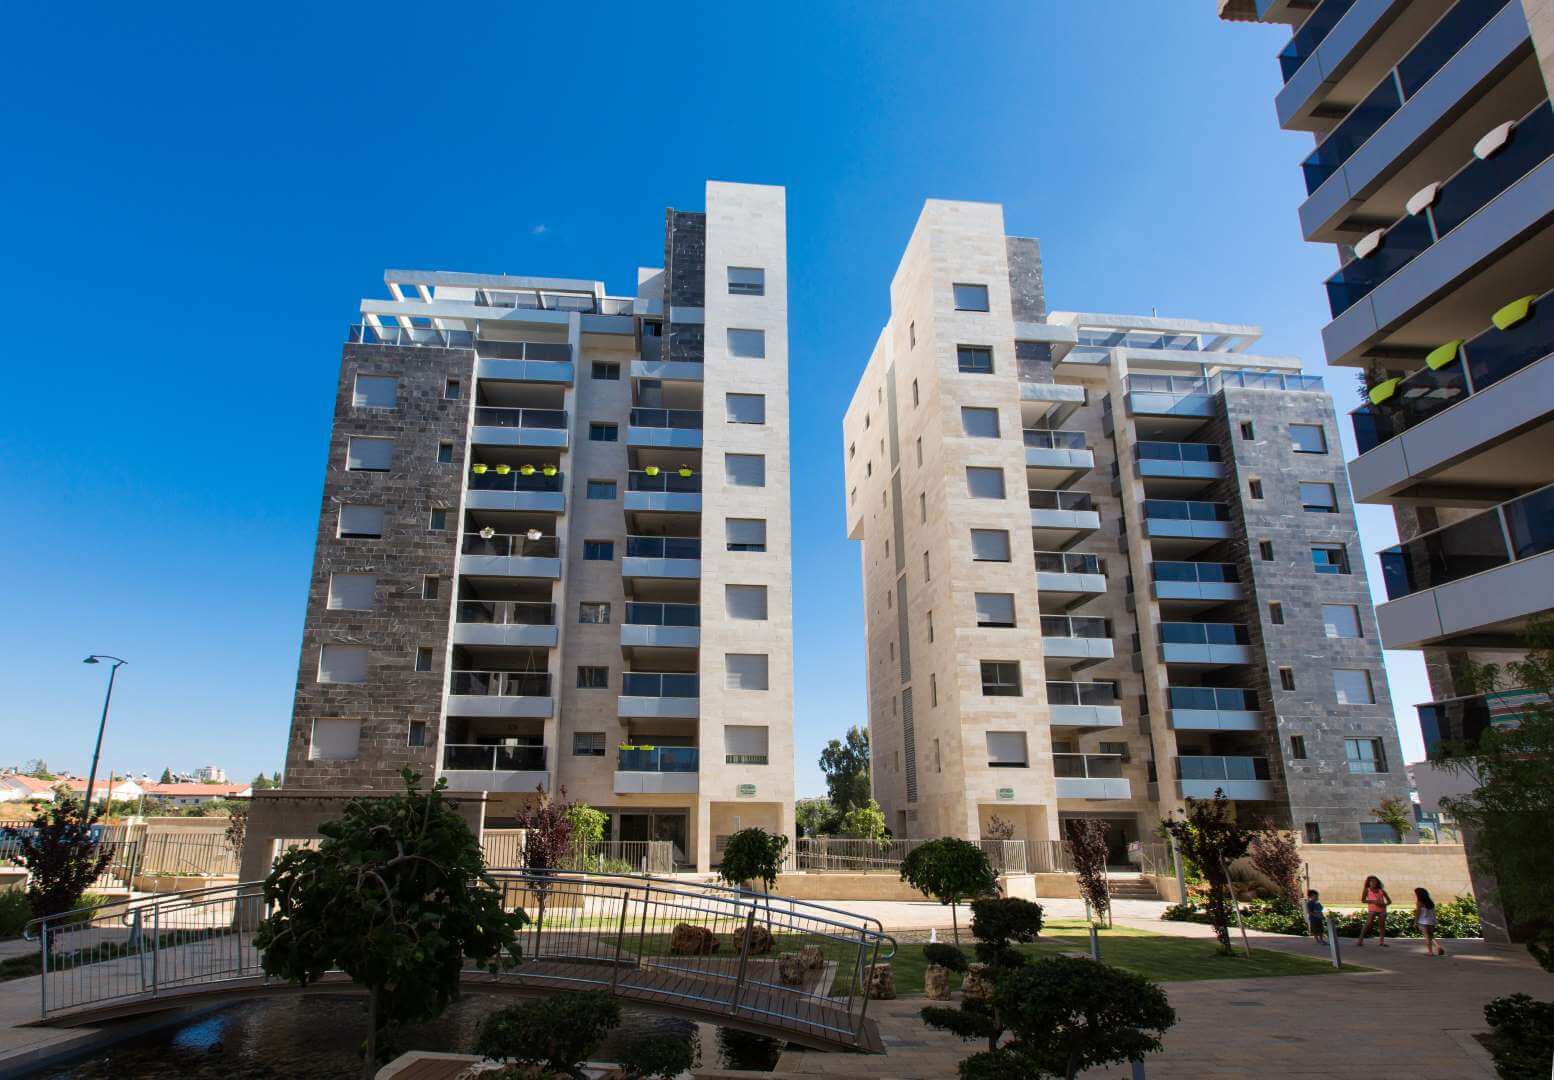 Photograph of a residential building from the NOTAN project in Herzliya